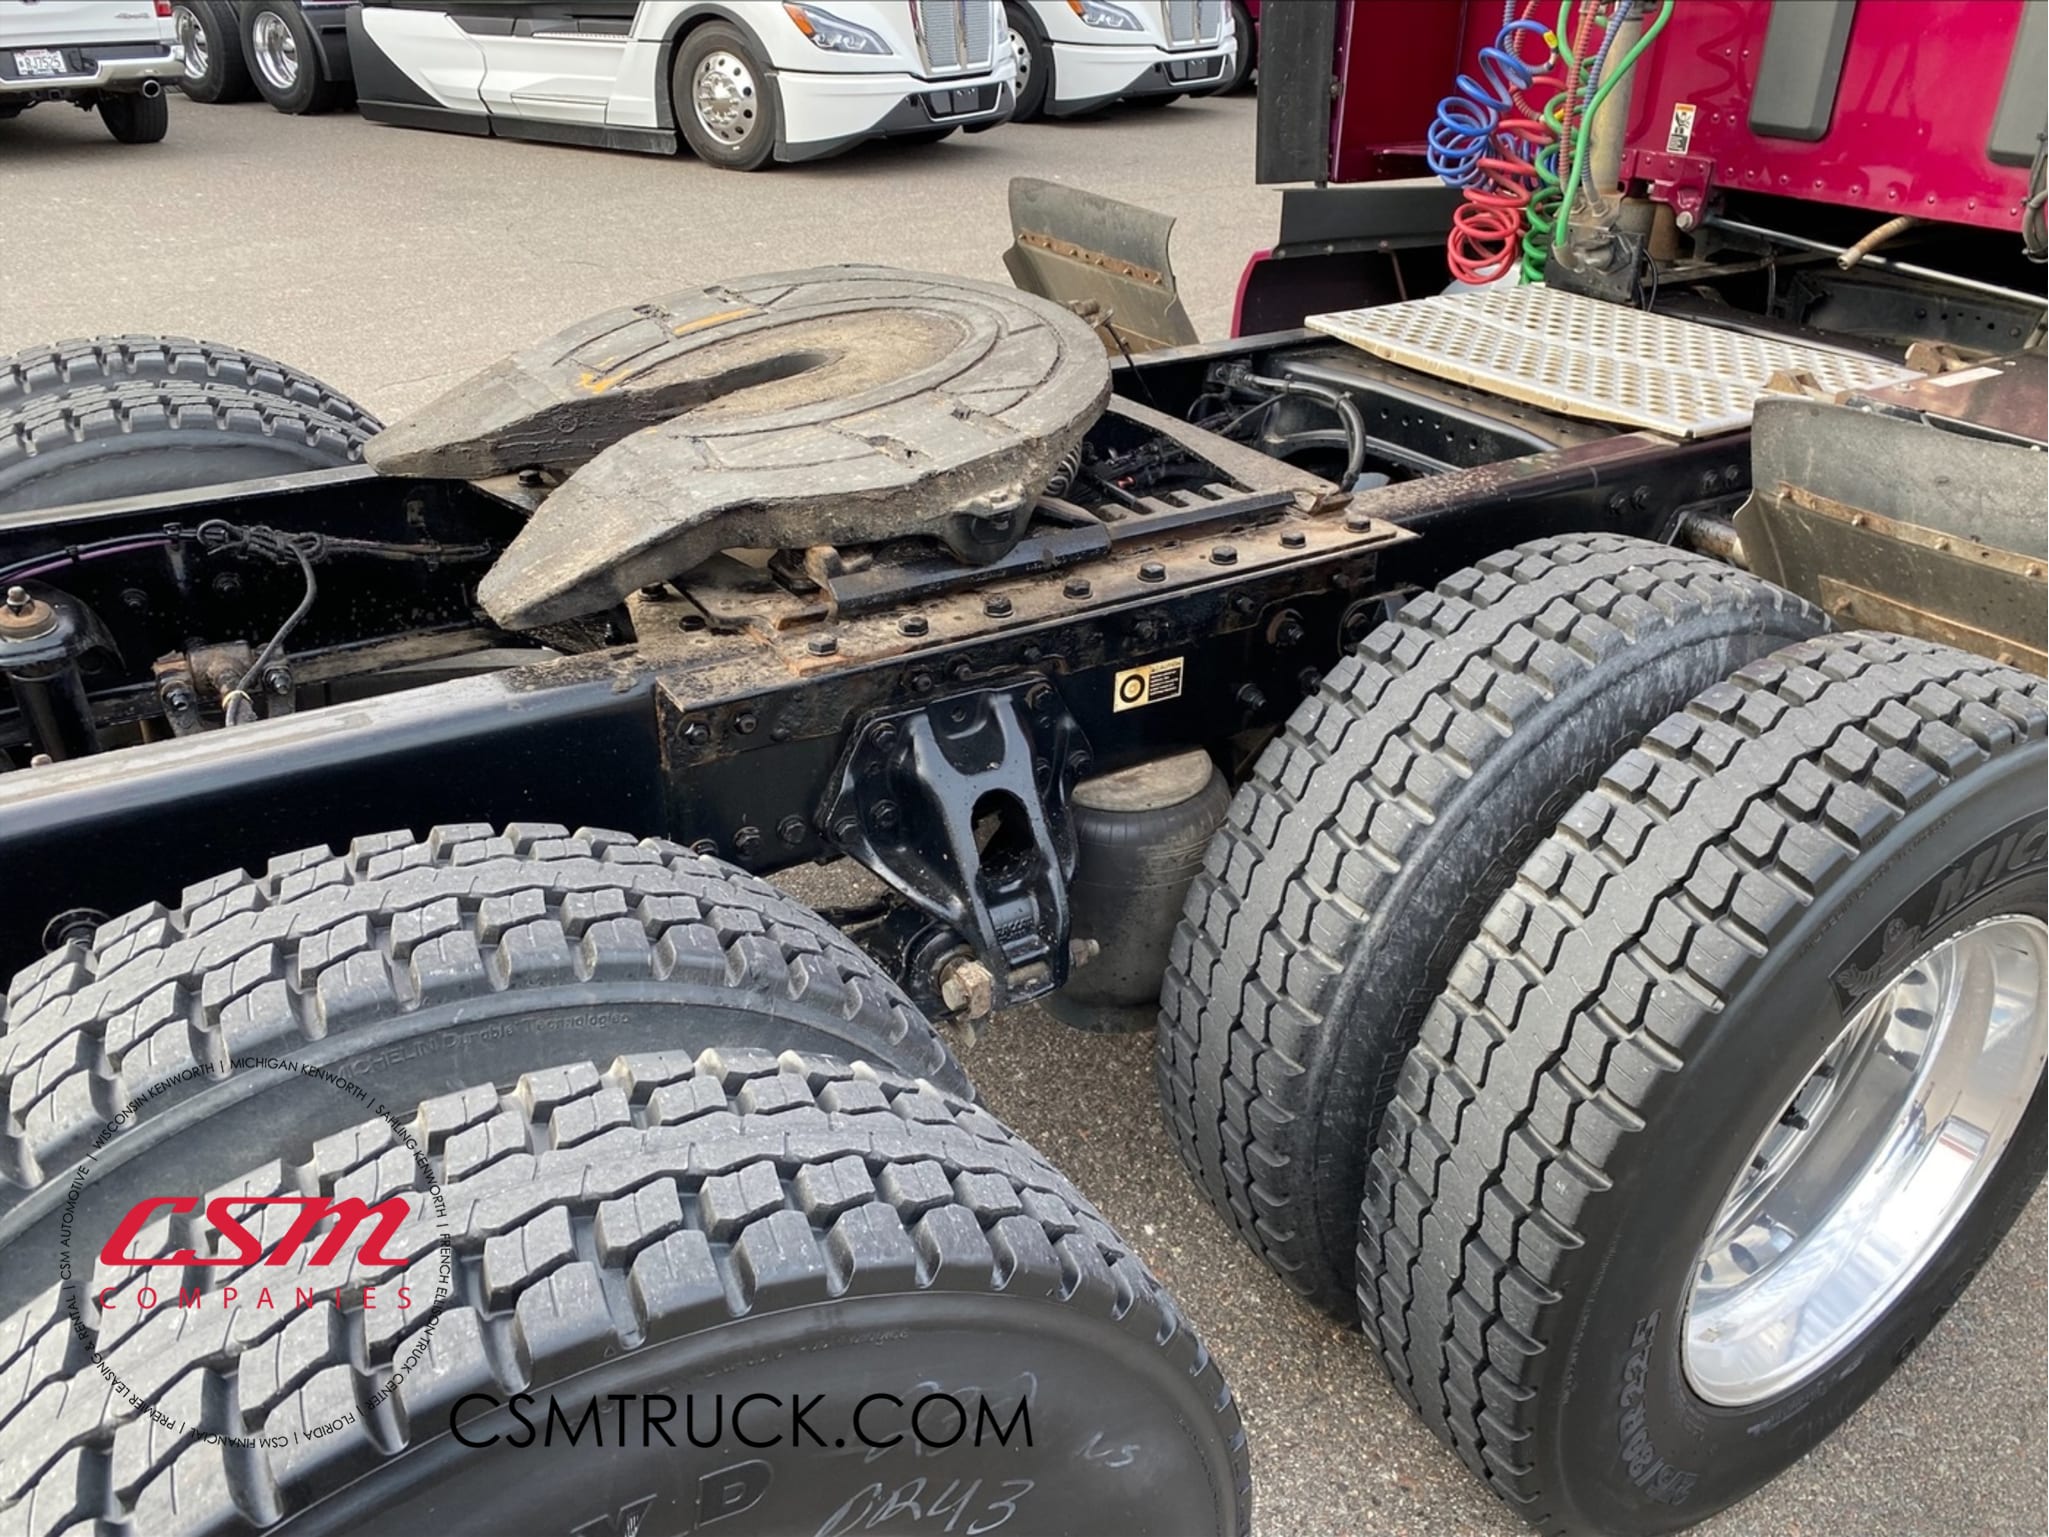 Passenger side rear frame and tire tread for this 2020 Kenworth T680 (Stock number: ULJ385357)